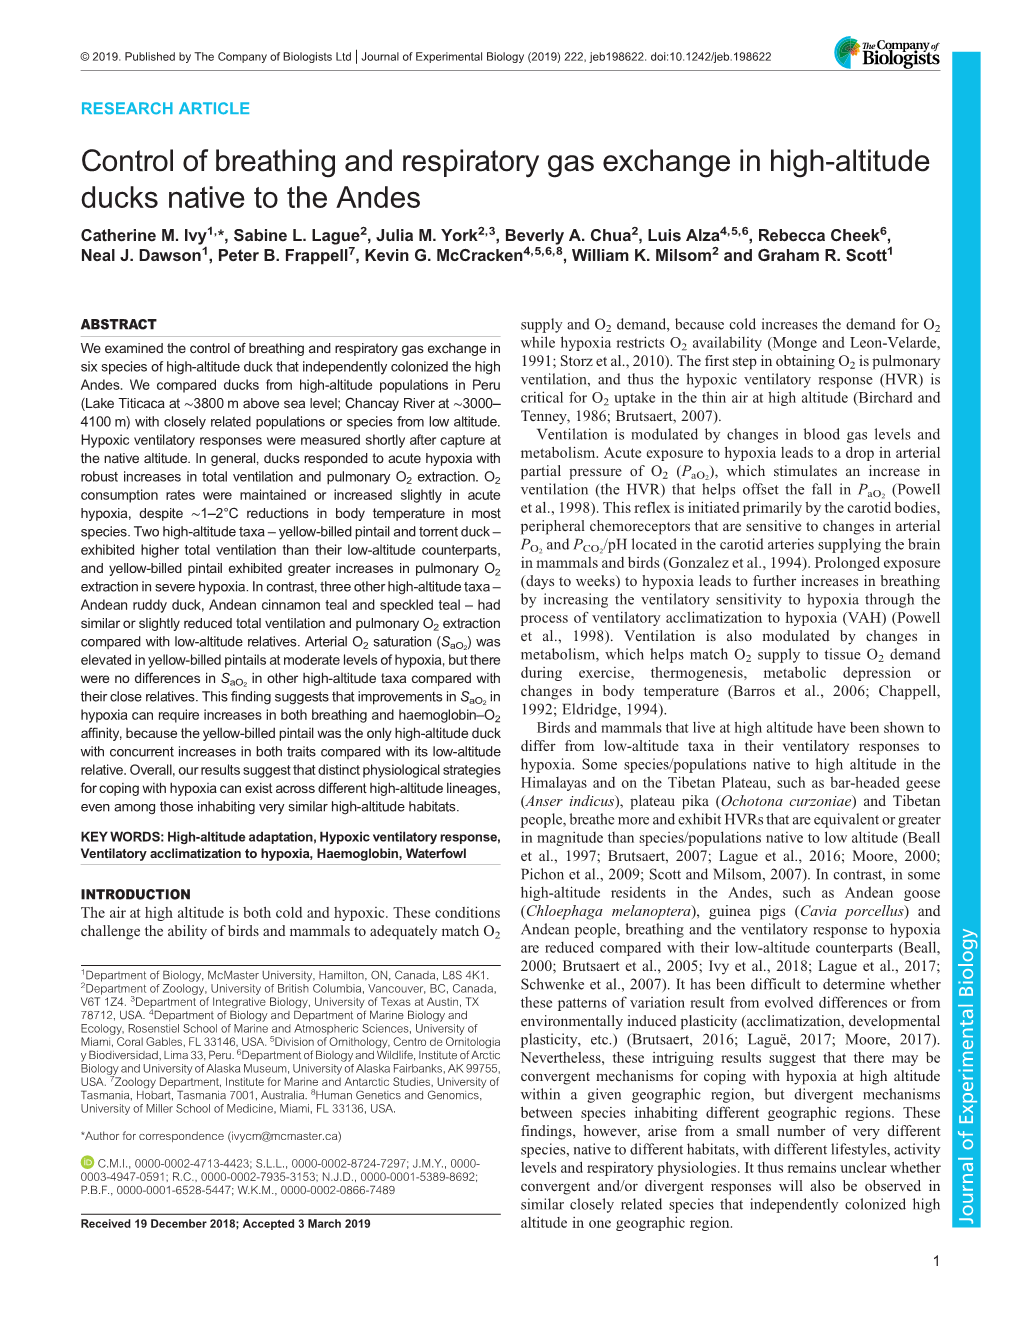 Control of Breathing and Respiratory Gas Exchange in High-Altitude Ducks Native to the Andes Catherine M